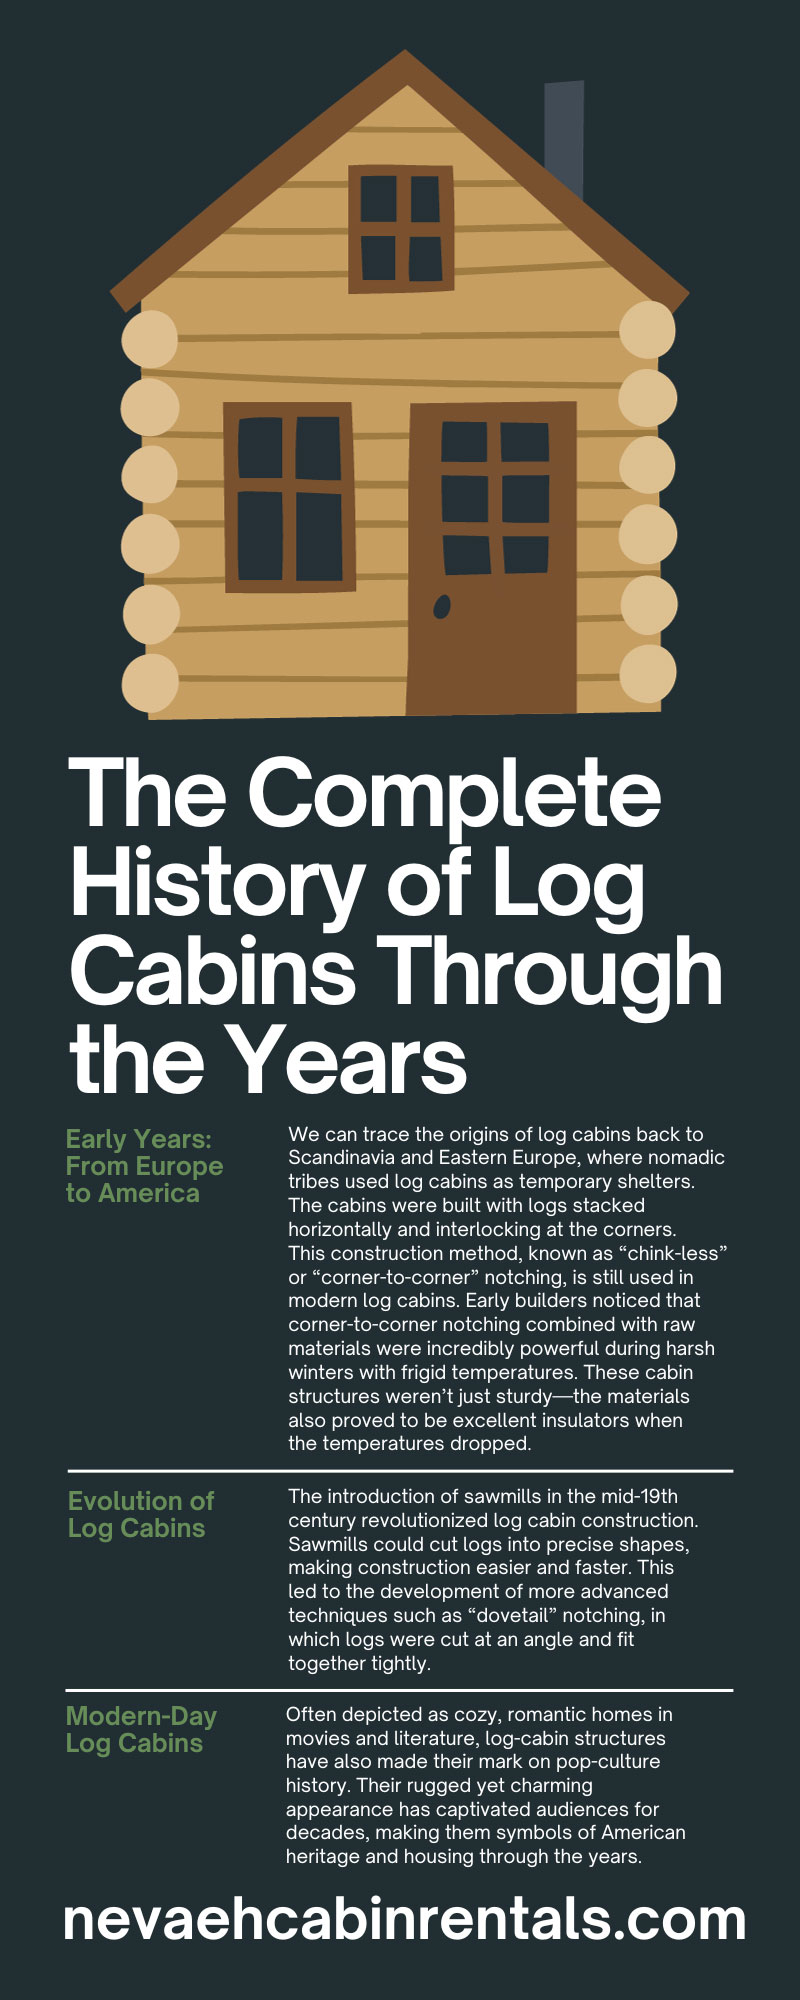 The Complete History of Log Cabins Through the Years